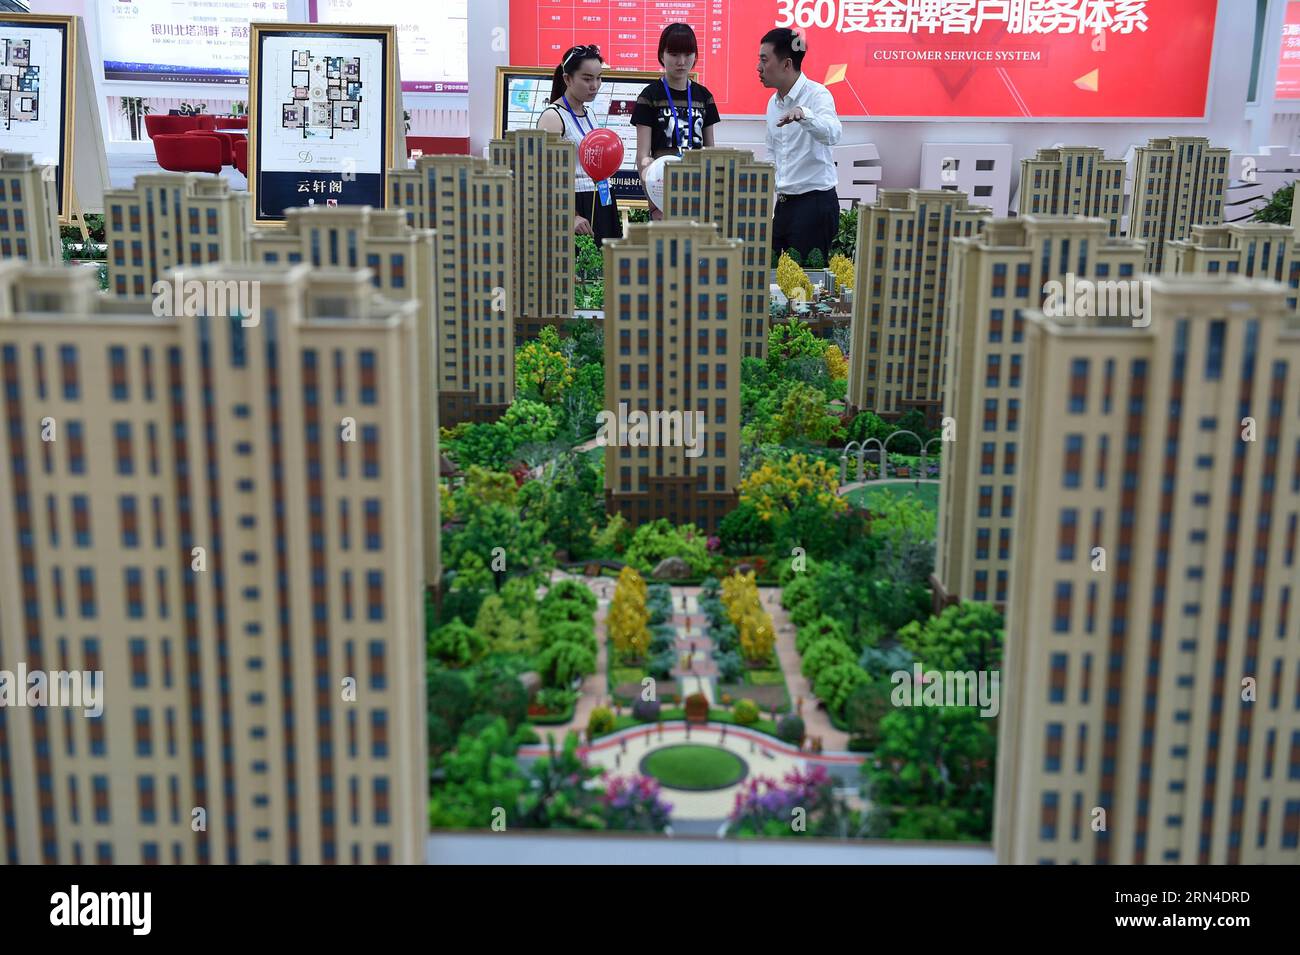 (150518) -- YINCHUAN, May 18, 2015 -- Residents consult about house property information at a housing trade fair in Yinchuan, northwest China s Ningxia Hui Autonomous Region, April 29, 2015. China s real estate market remained anemic with new home prices in April registering month-on-month declines in 48 of the 70 surveyed cities. ) (wf) CHINA-APRIL-REAL ESTATE MARKET (CN) WangxPeng PUBLICATIONxNOTxINxCHN   Yinchuan May 18 2015 Residents Consult About House Property Information AT a Housing Trade Fair in Yinchuan Northwest China S Ningxia Hui Autonomous Region April 29 2015 China S Real Estate Stock Photo